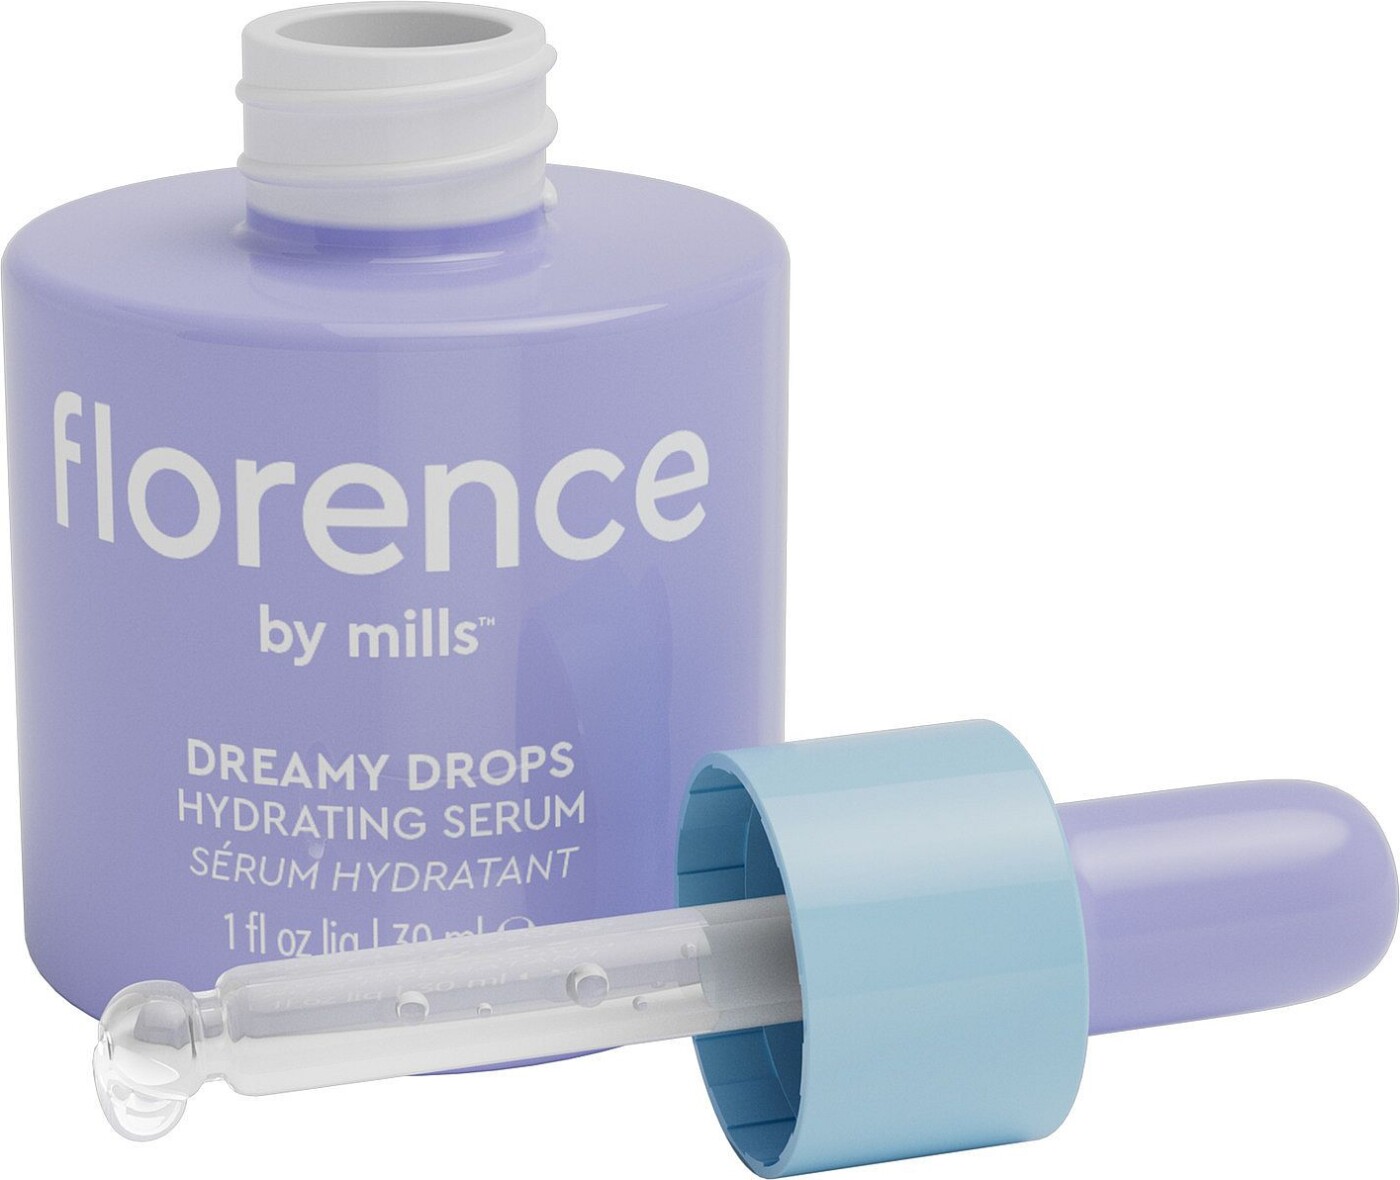 Se Florence By Mills - Dreamy Drops Hydrating Serum - 30 Ml hos Gucca.dk